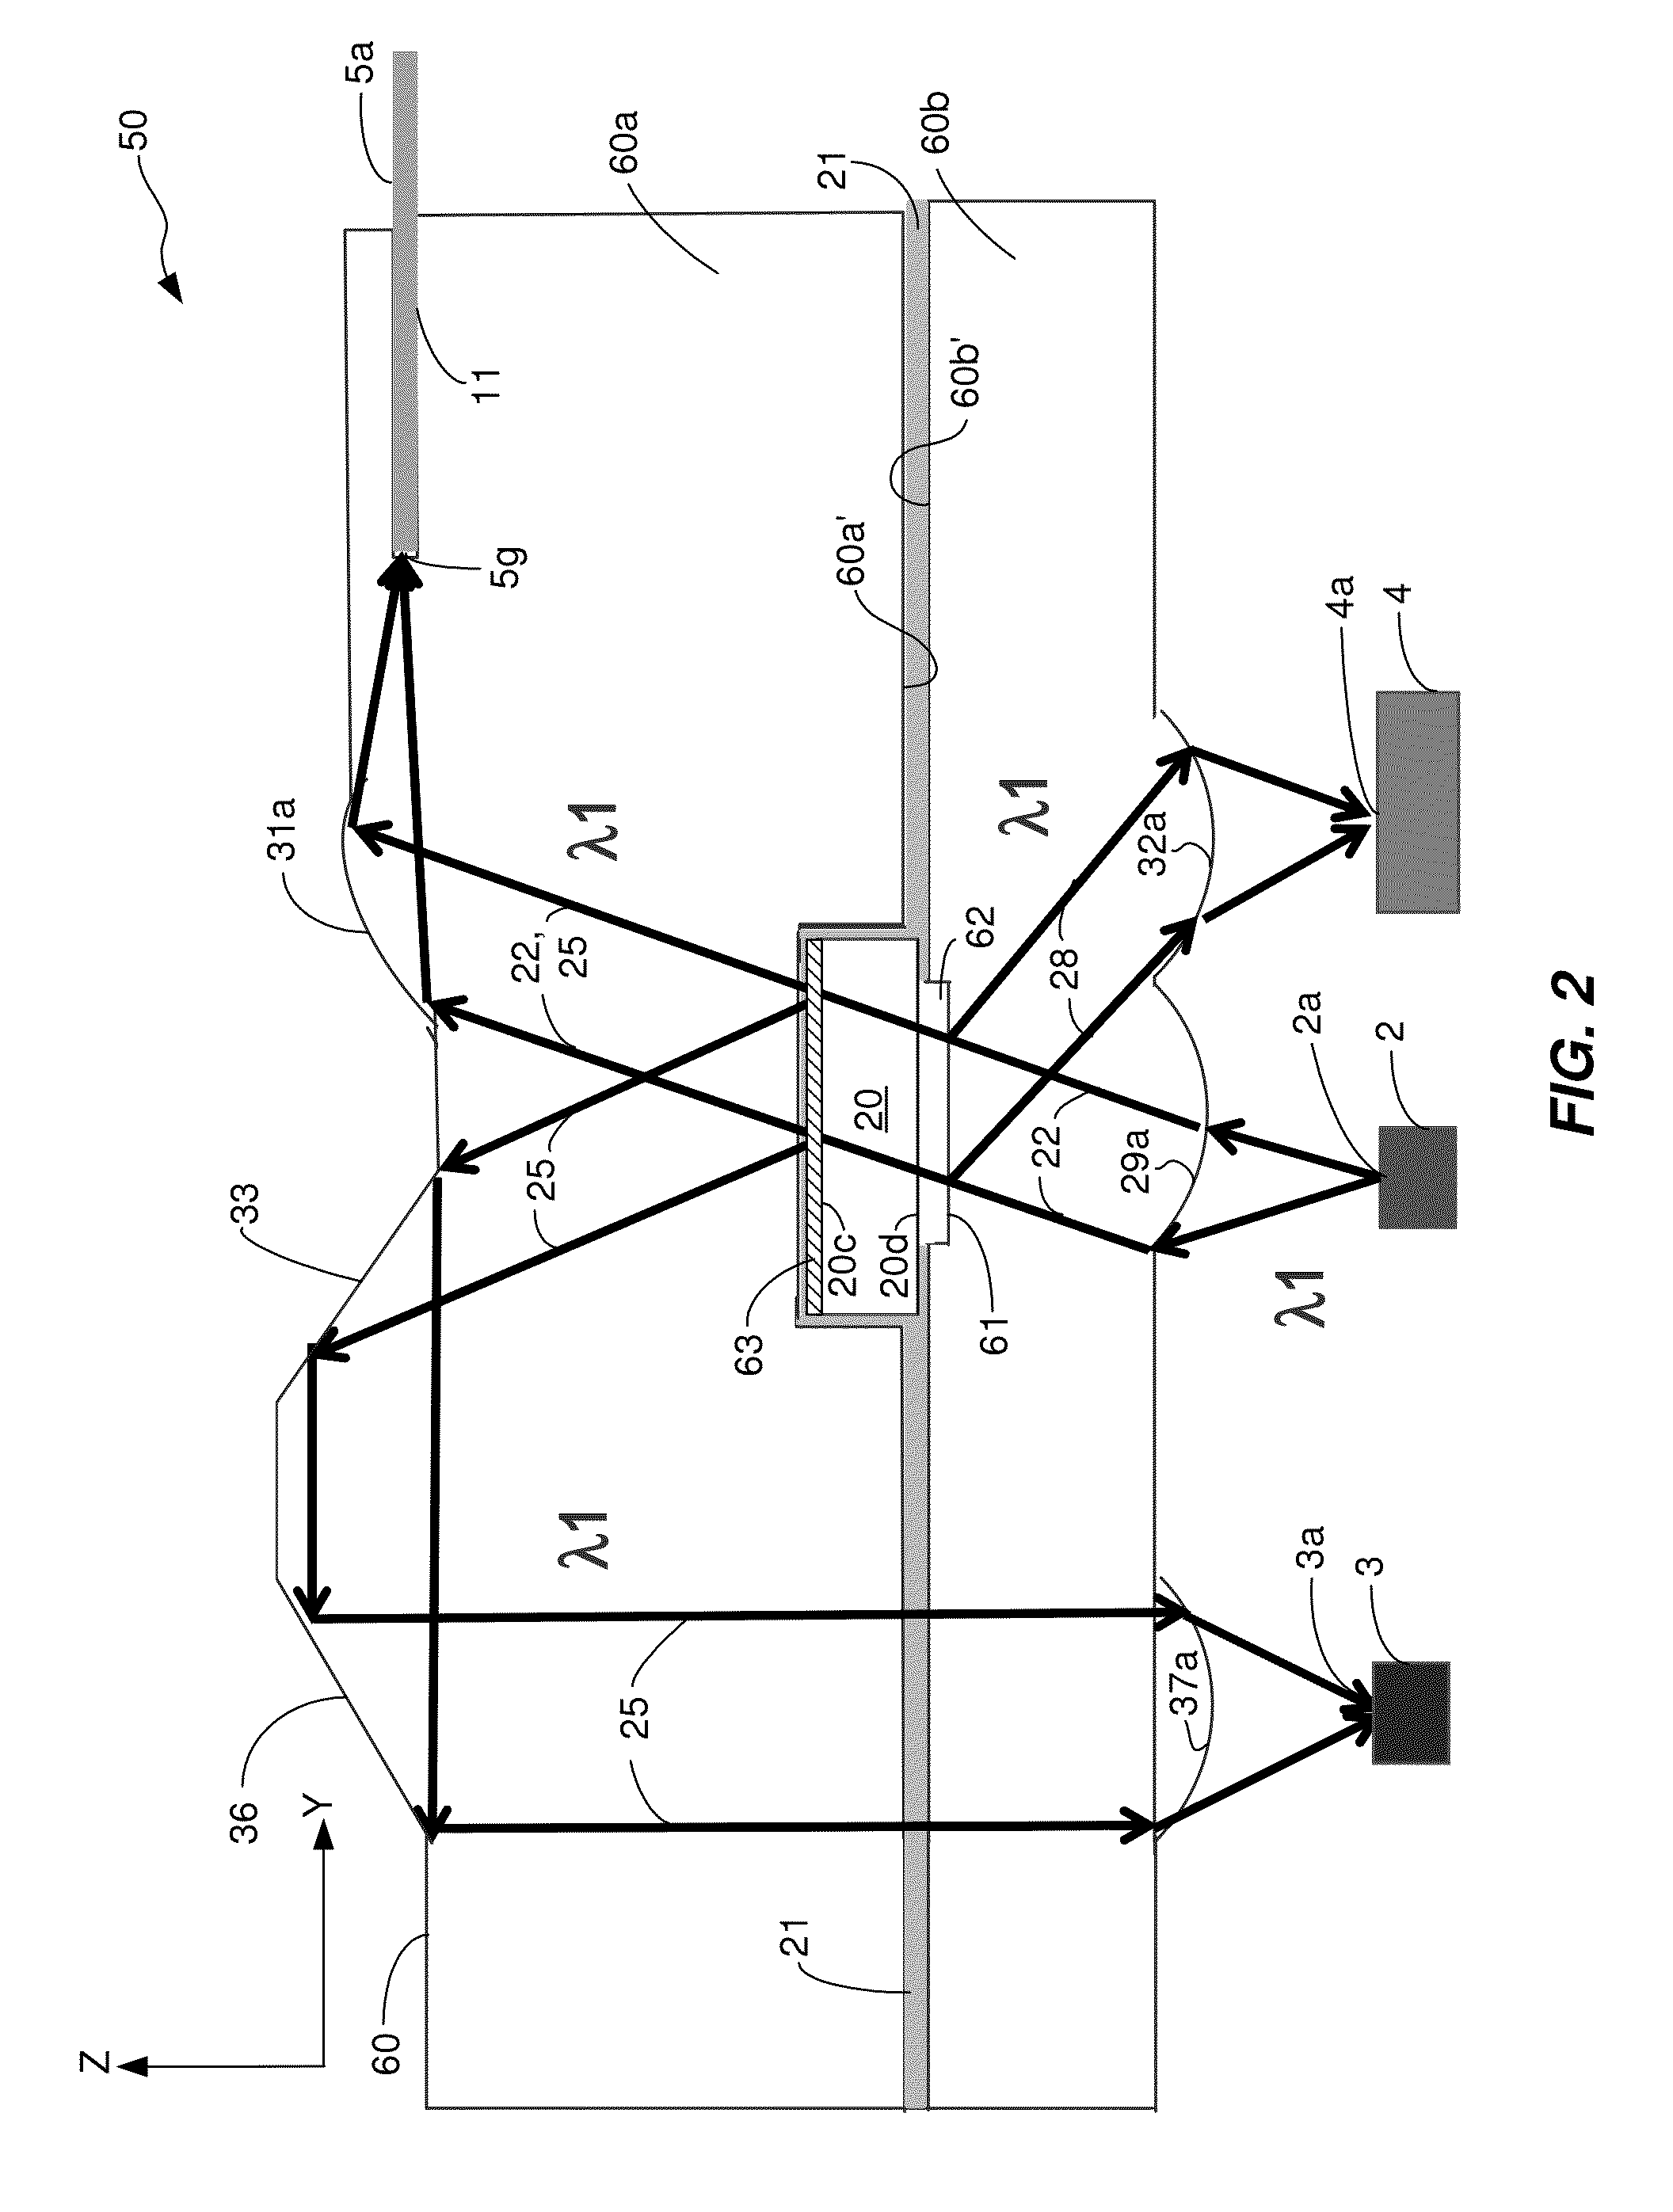 Bidirectional parallel optical transceiver module and a method for bidirectionally communicating optical signals over an optical link